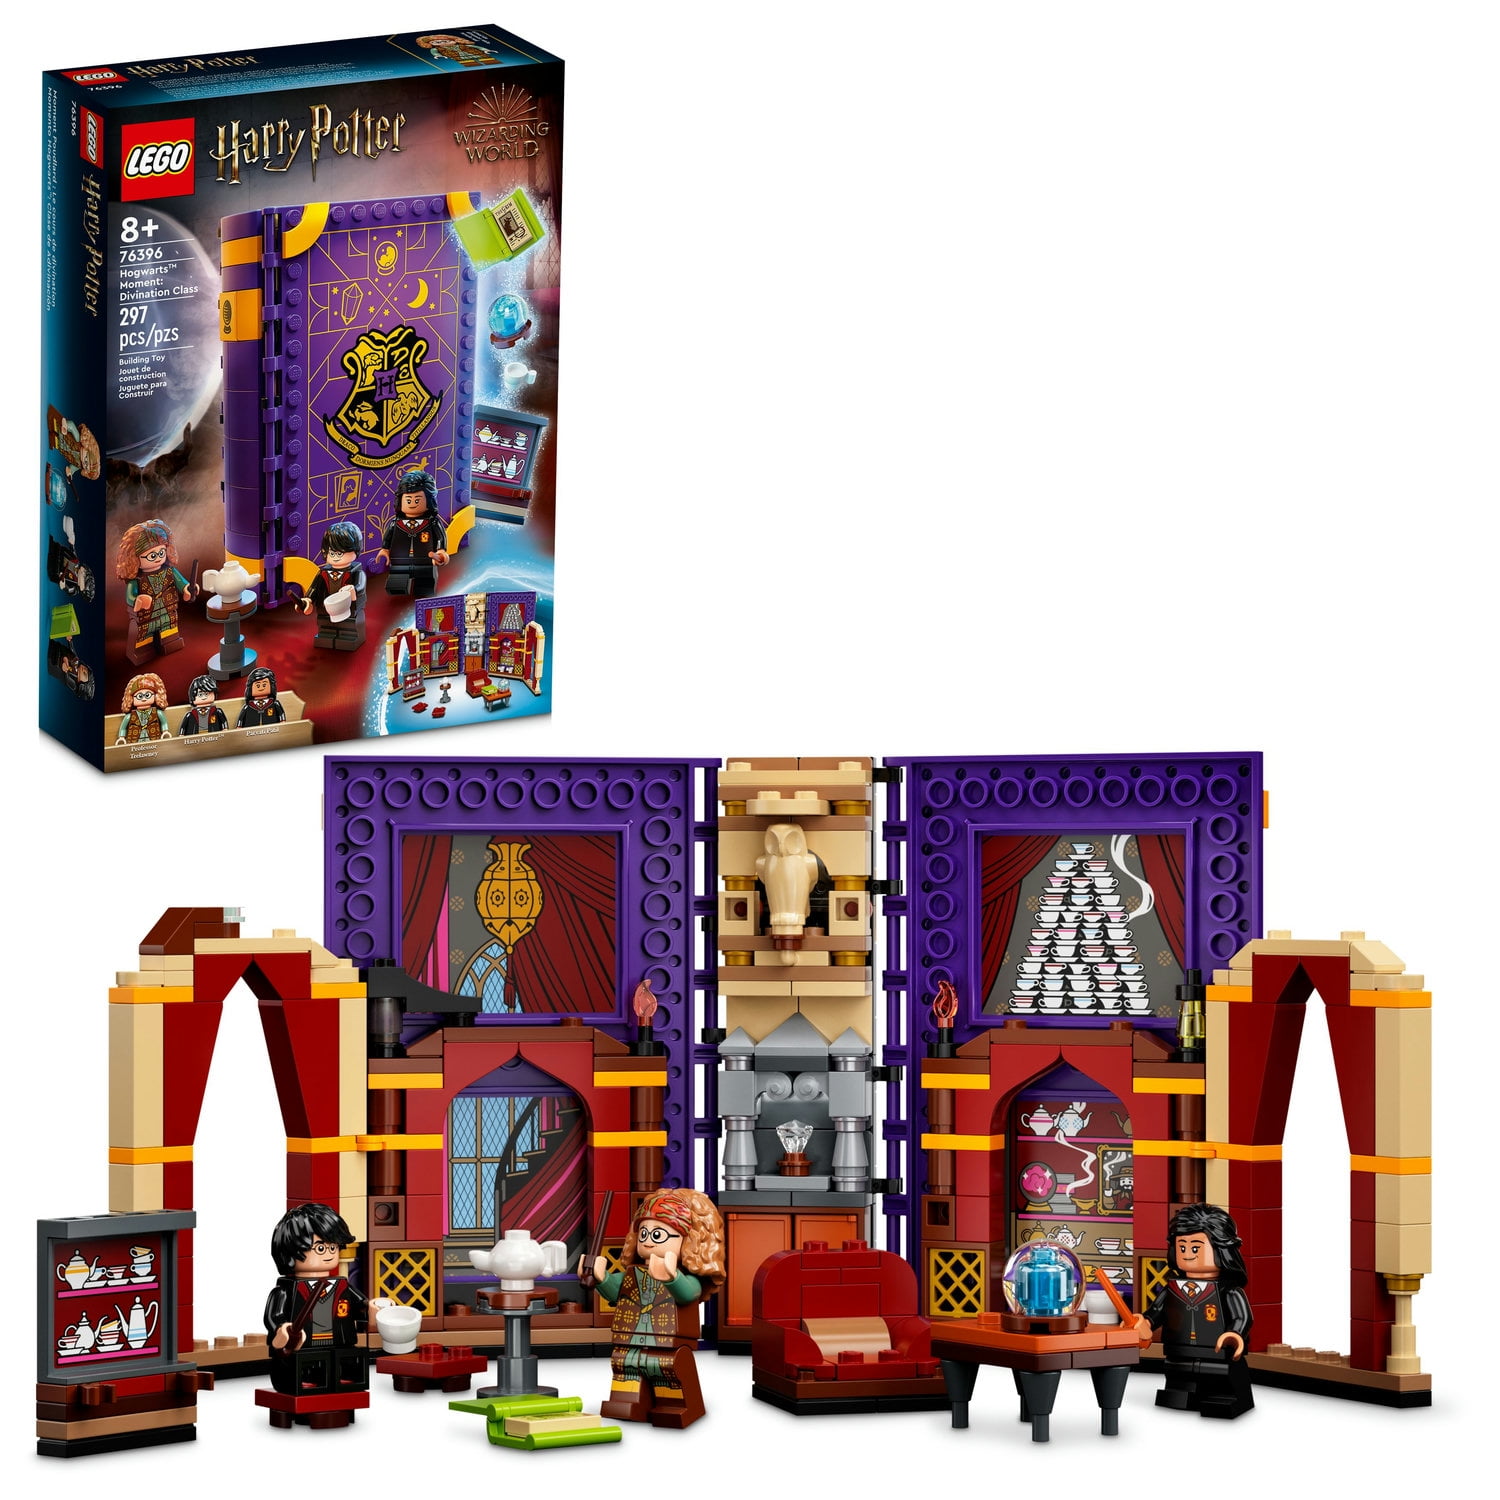 Highland Goodwill pakke LEGO Harry Potter Hogwarts Moment: Divination Class 76396 Building Kit;  Collectible Classroom Playset for Ages 8+ (297 Pieces) - Walmart.com